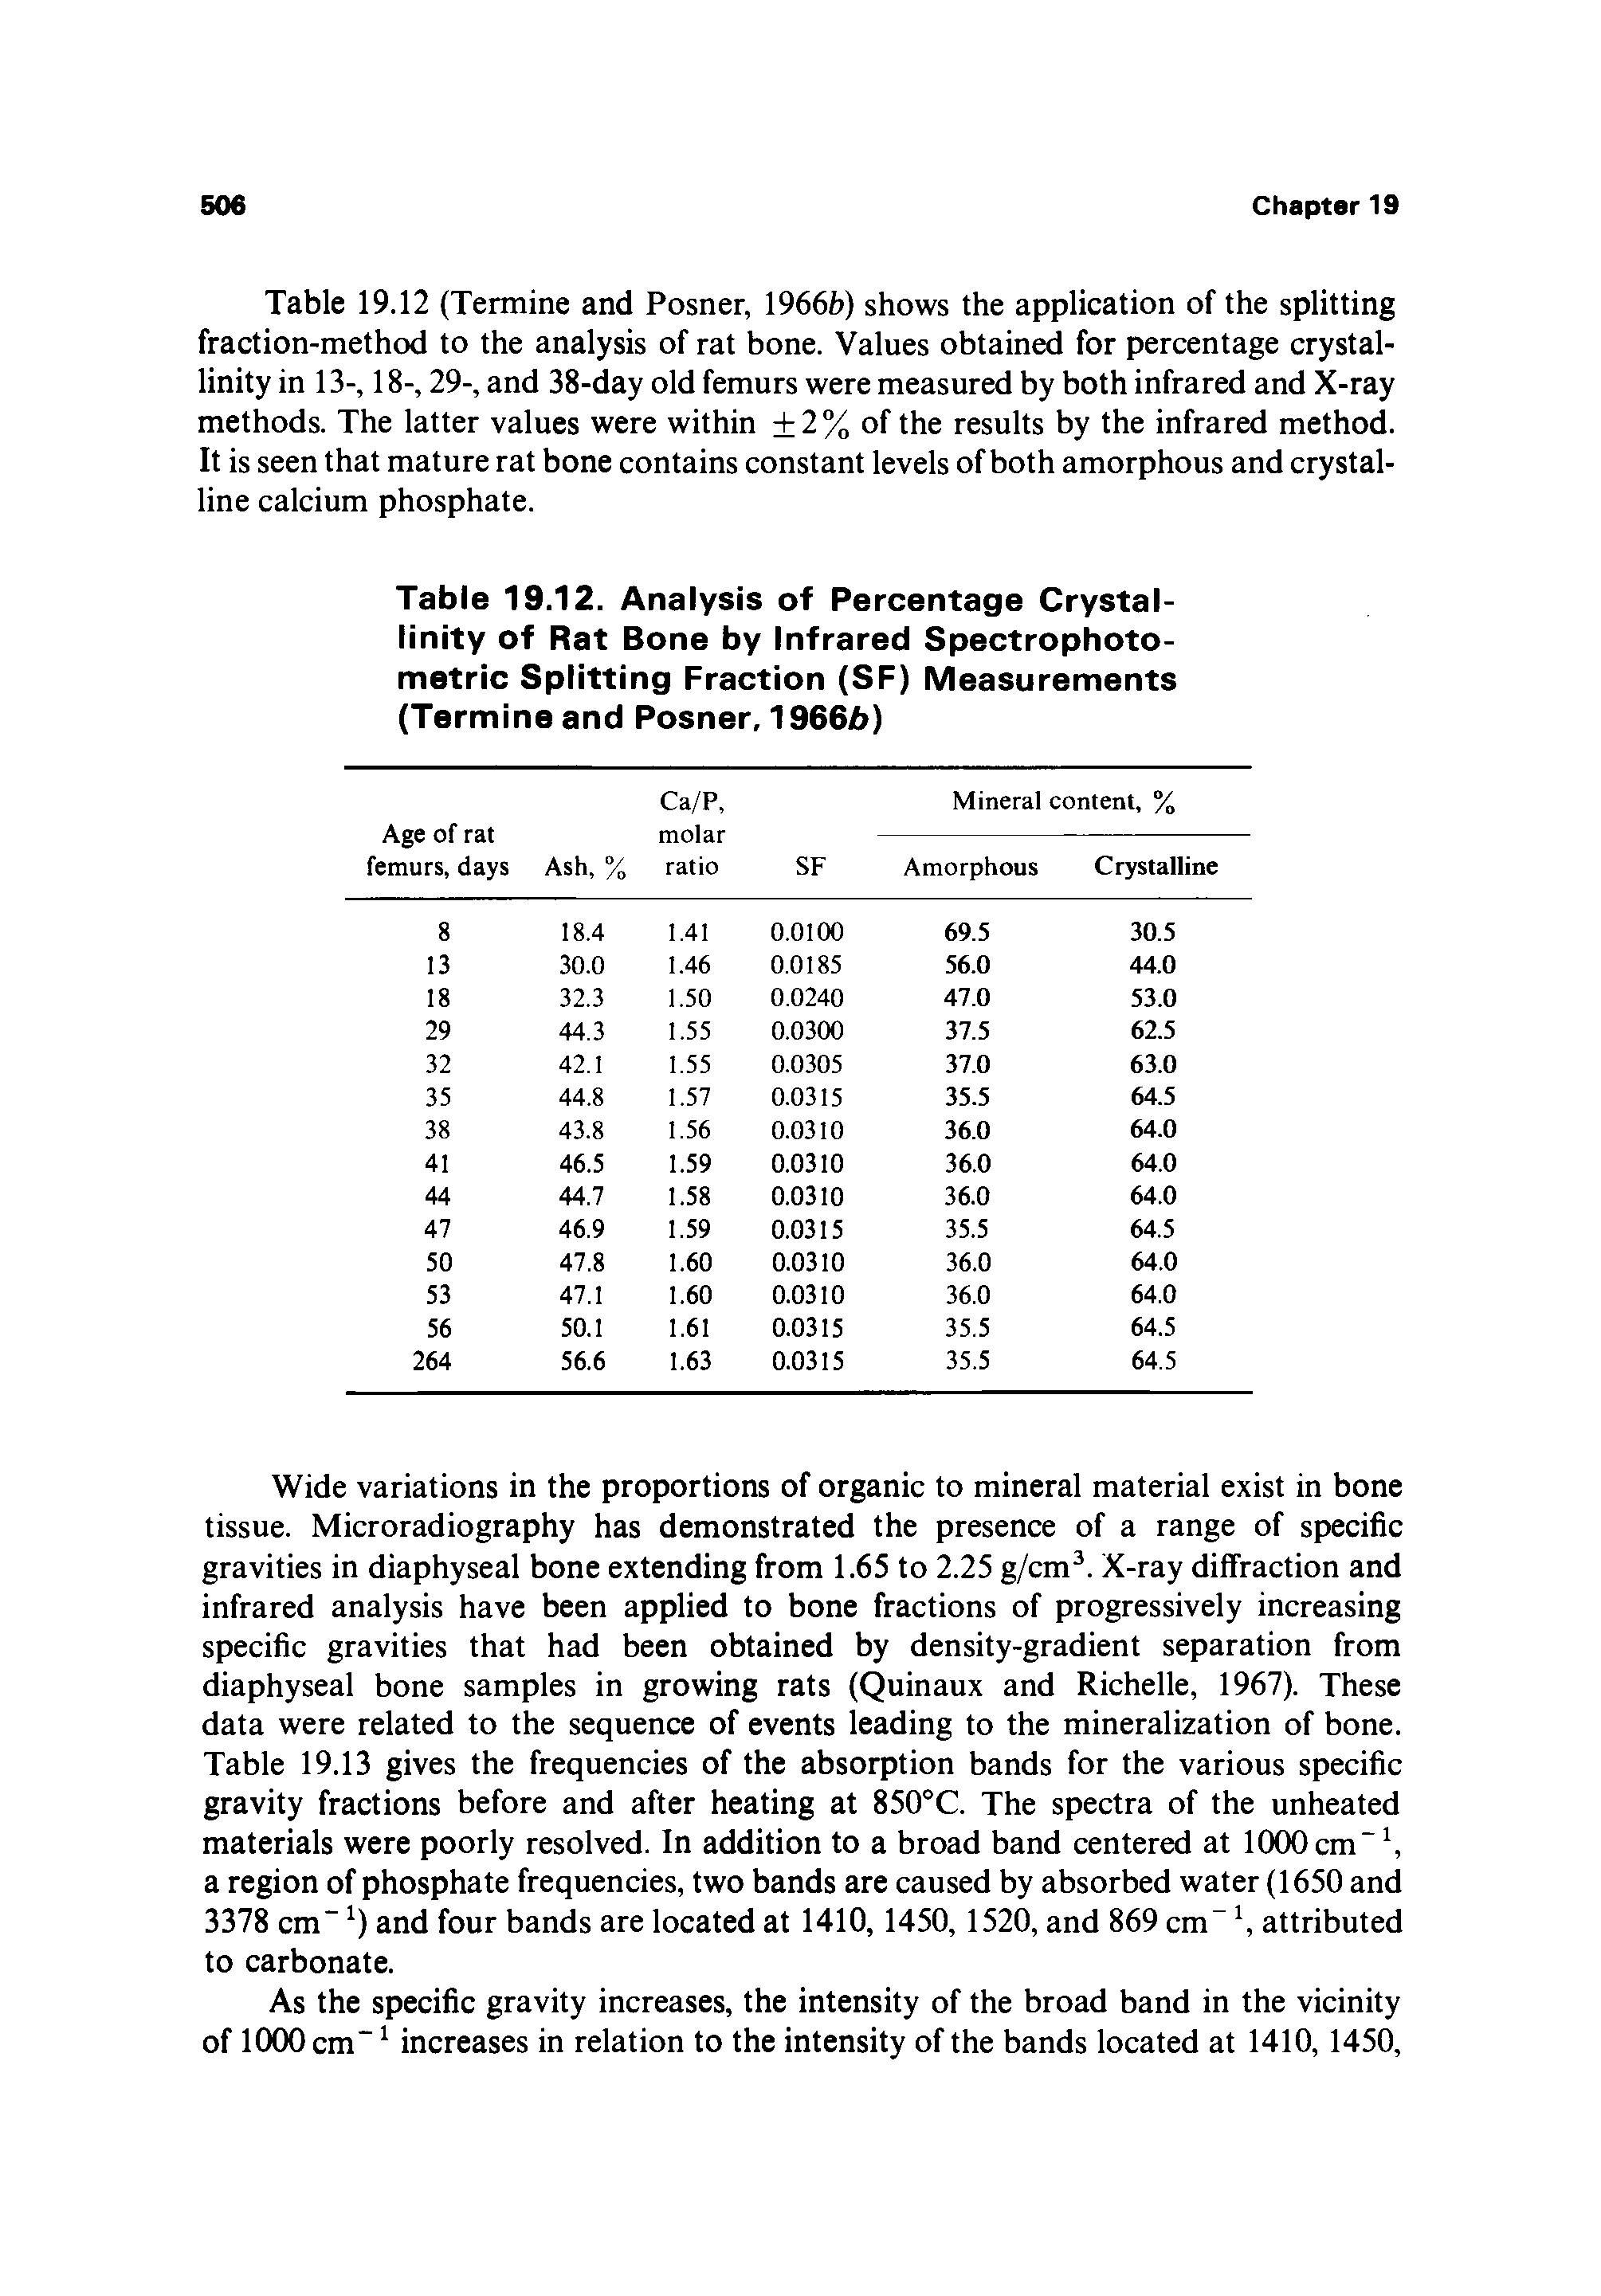 Table 19.12. Analysis of Percentage Crystallinity of Rat Bone by Infrared Spectrophoto-metric Splitting Fraction (SF) Measurements (Termine and Posner, 1966b)...